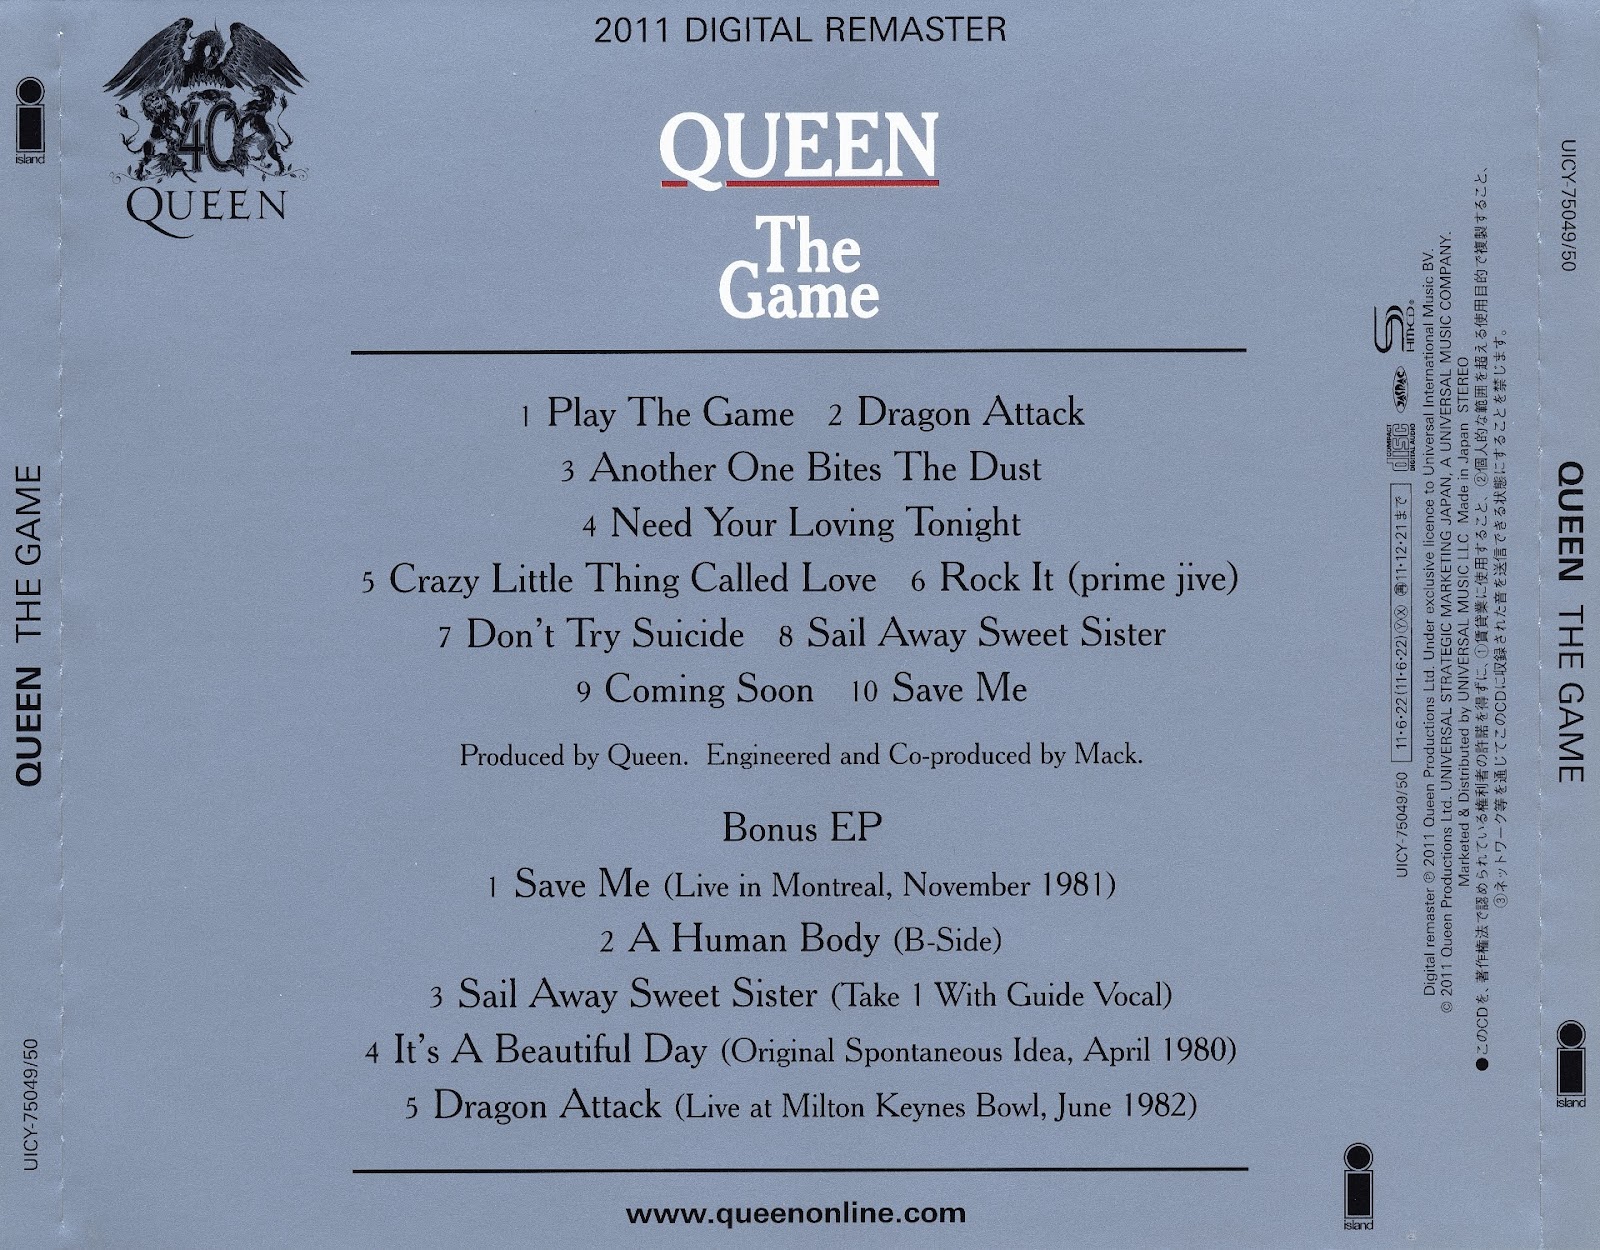 Another one bites текст. Queen the game обложка. Queen "the works (2cd)". Queen the game 1980 обложка альбома. Queen Queen 1973.